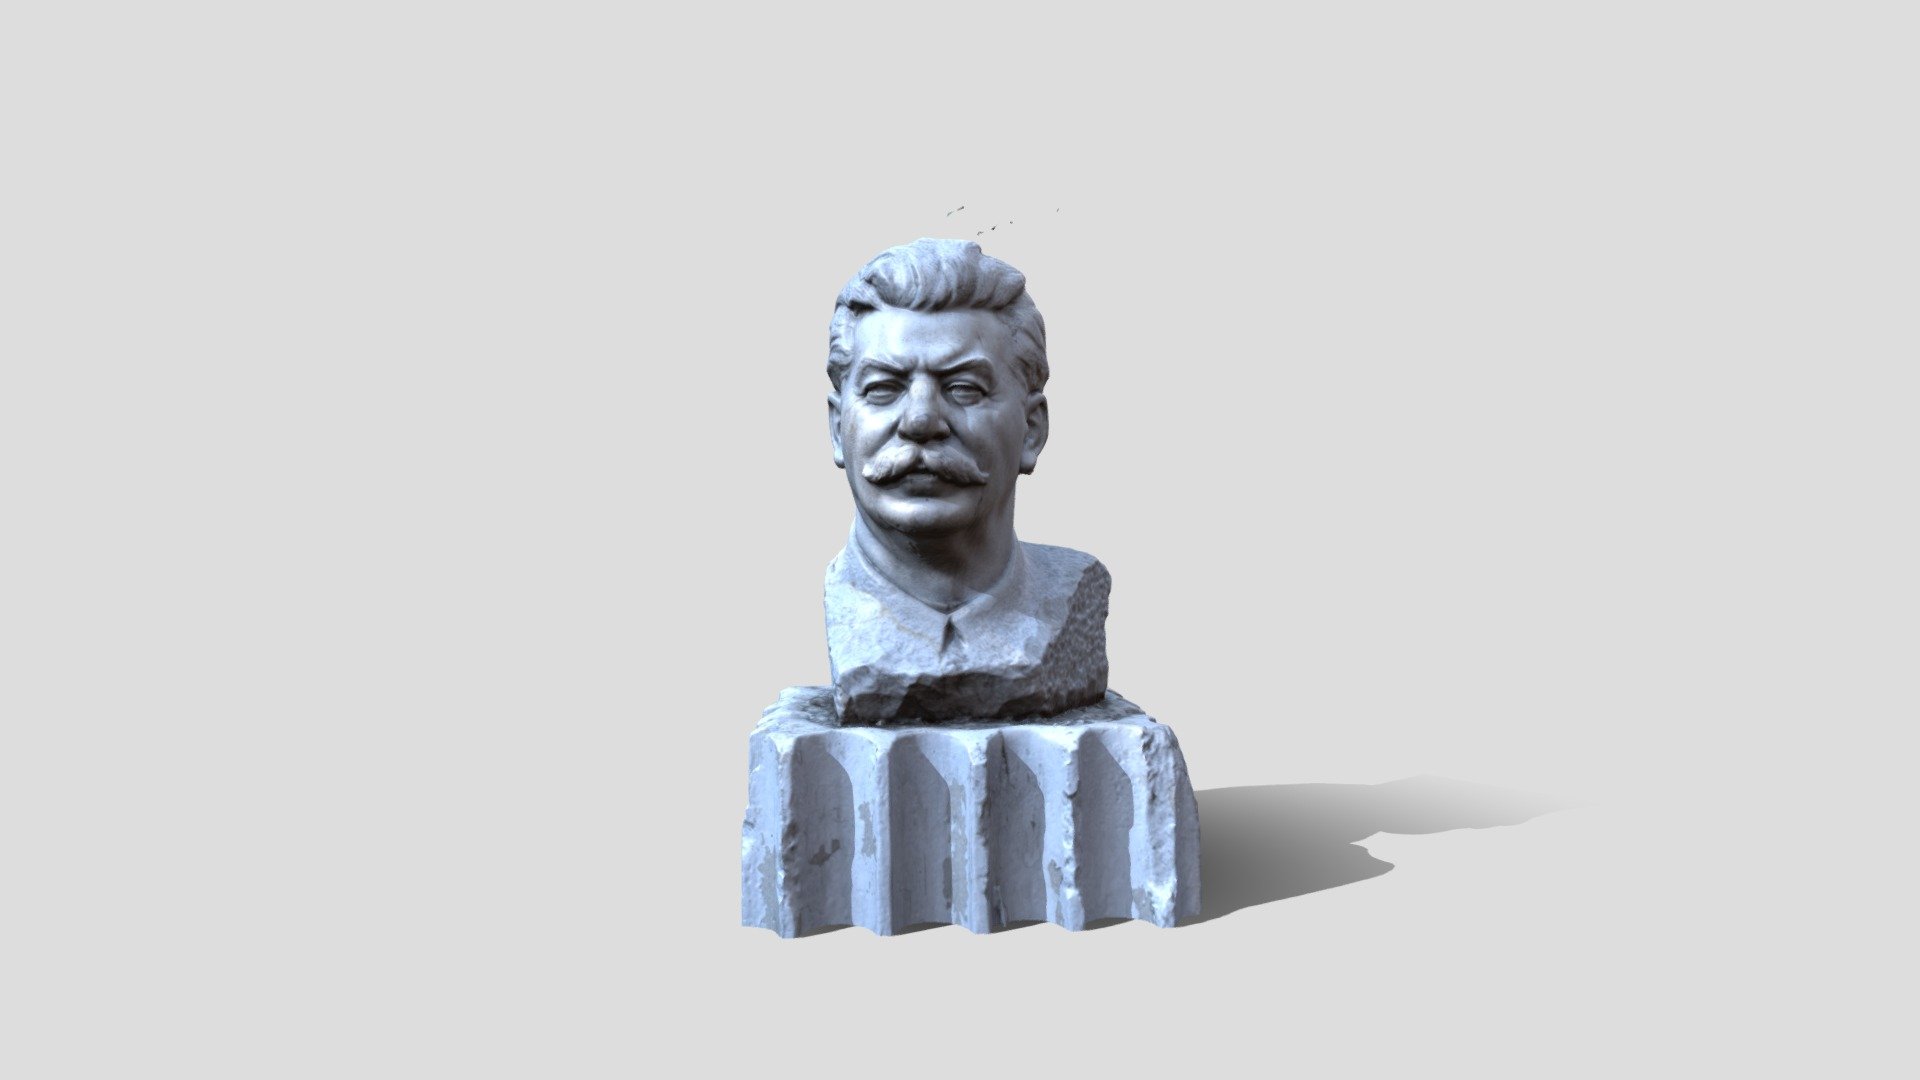 Bust of Joseph Stalin
Created from 120 images - Bust of Joseph Stalin - 3D model by EvilCPU (@happyastronaut6151) 3d model